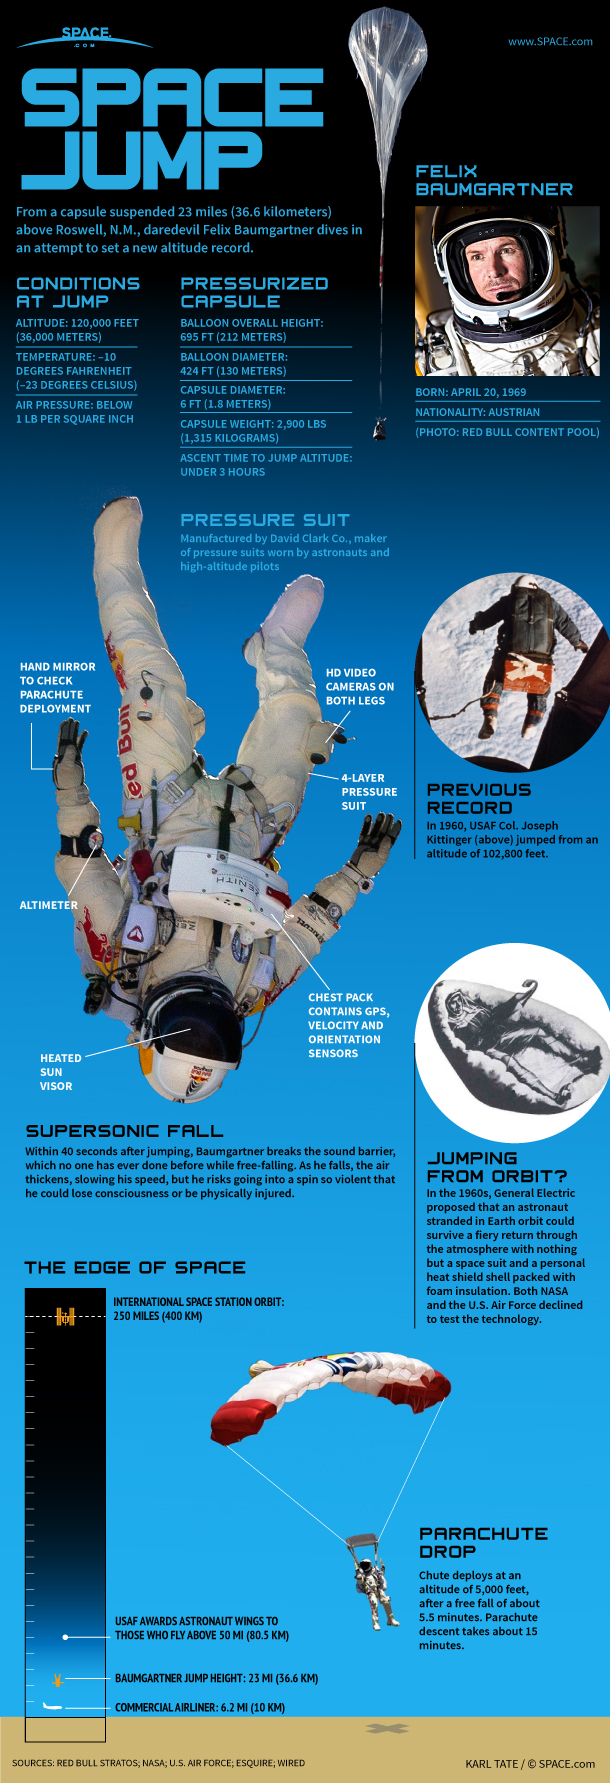 Space Jump: Baumgartner's Record-Breaking Supersonic Skydive Works (Infographic) Space